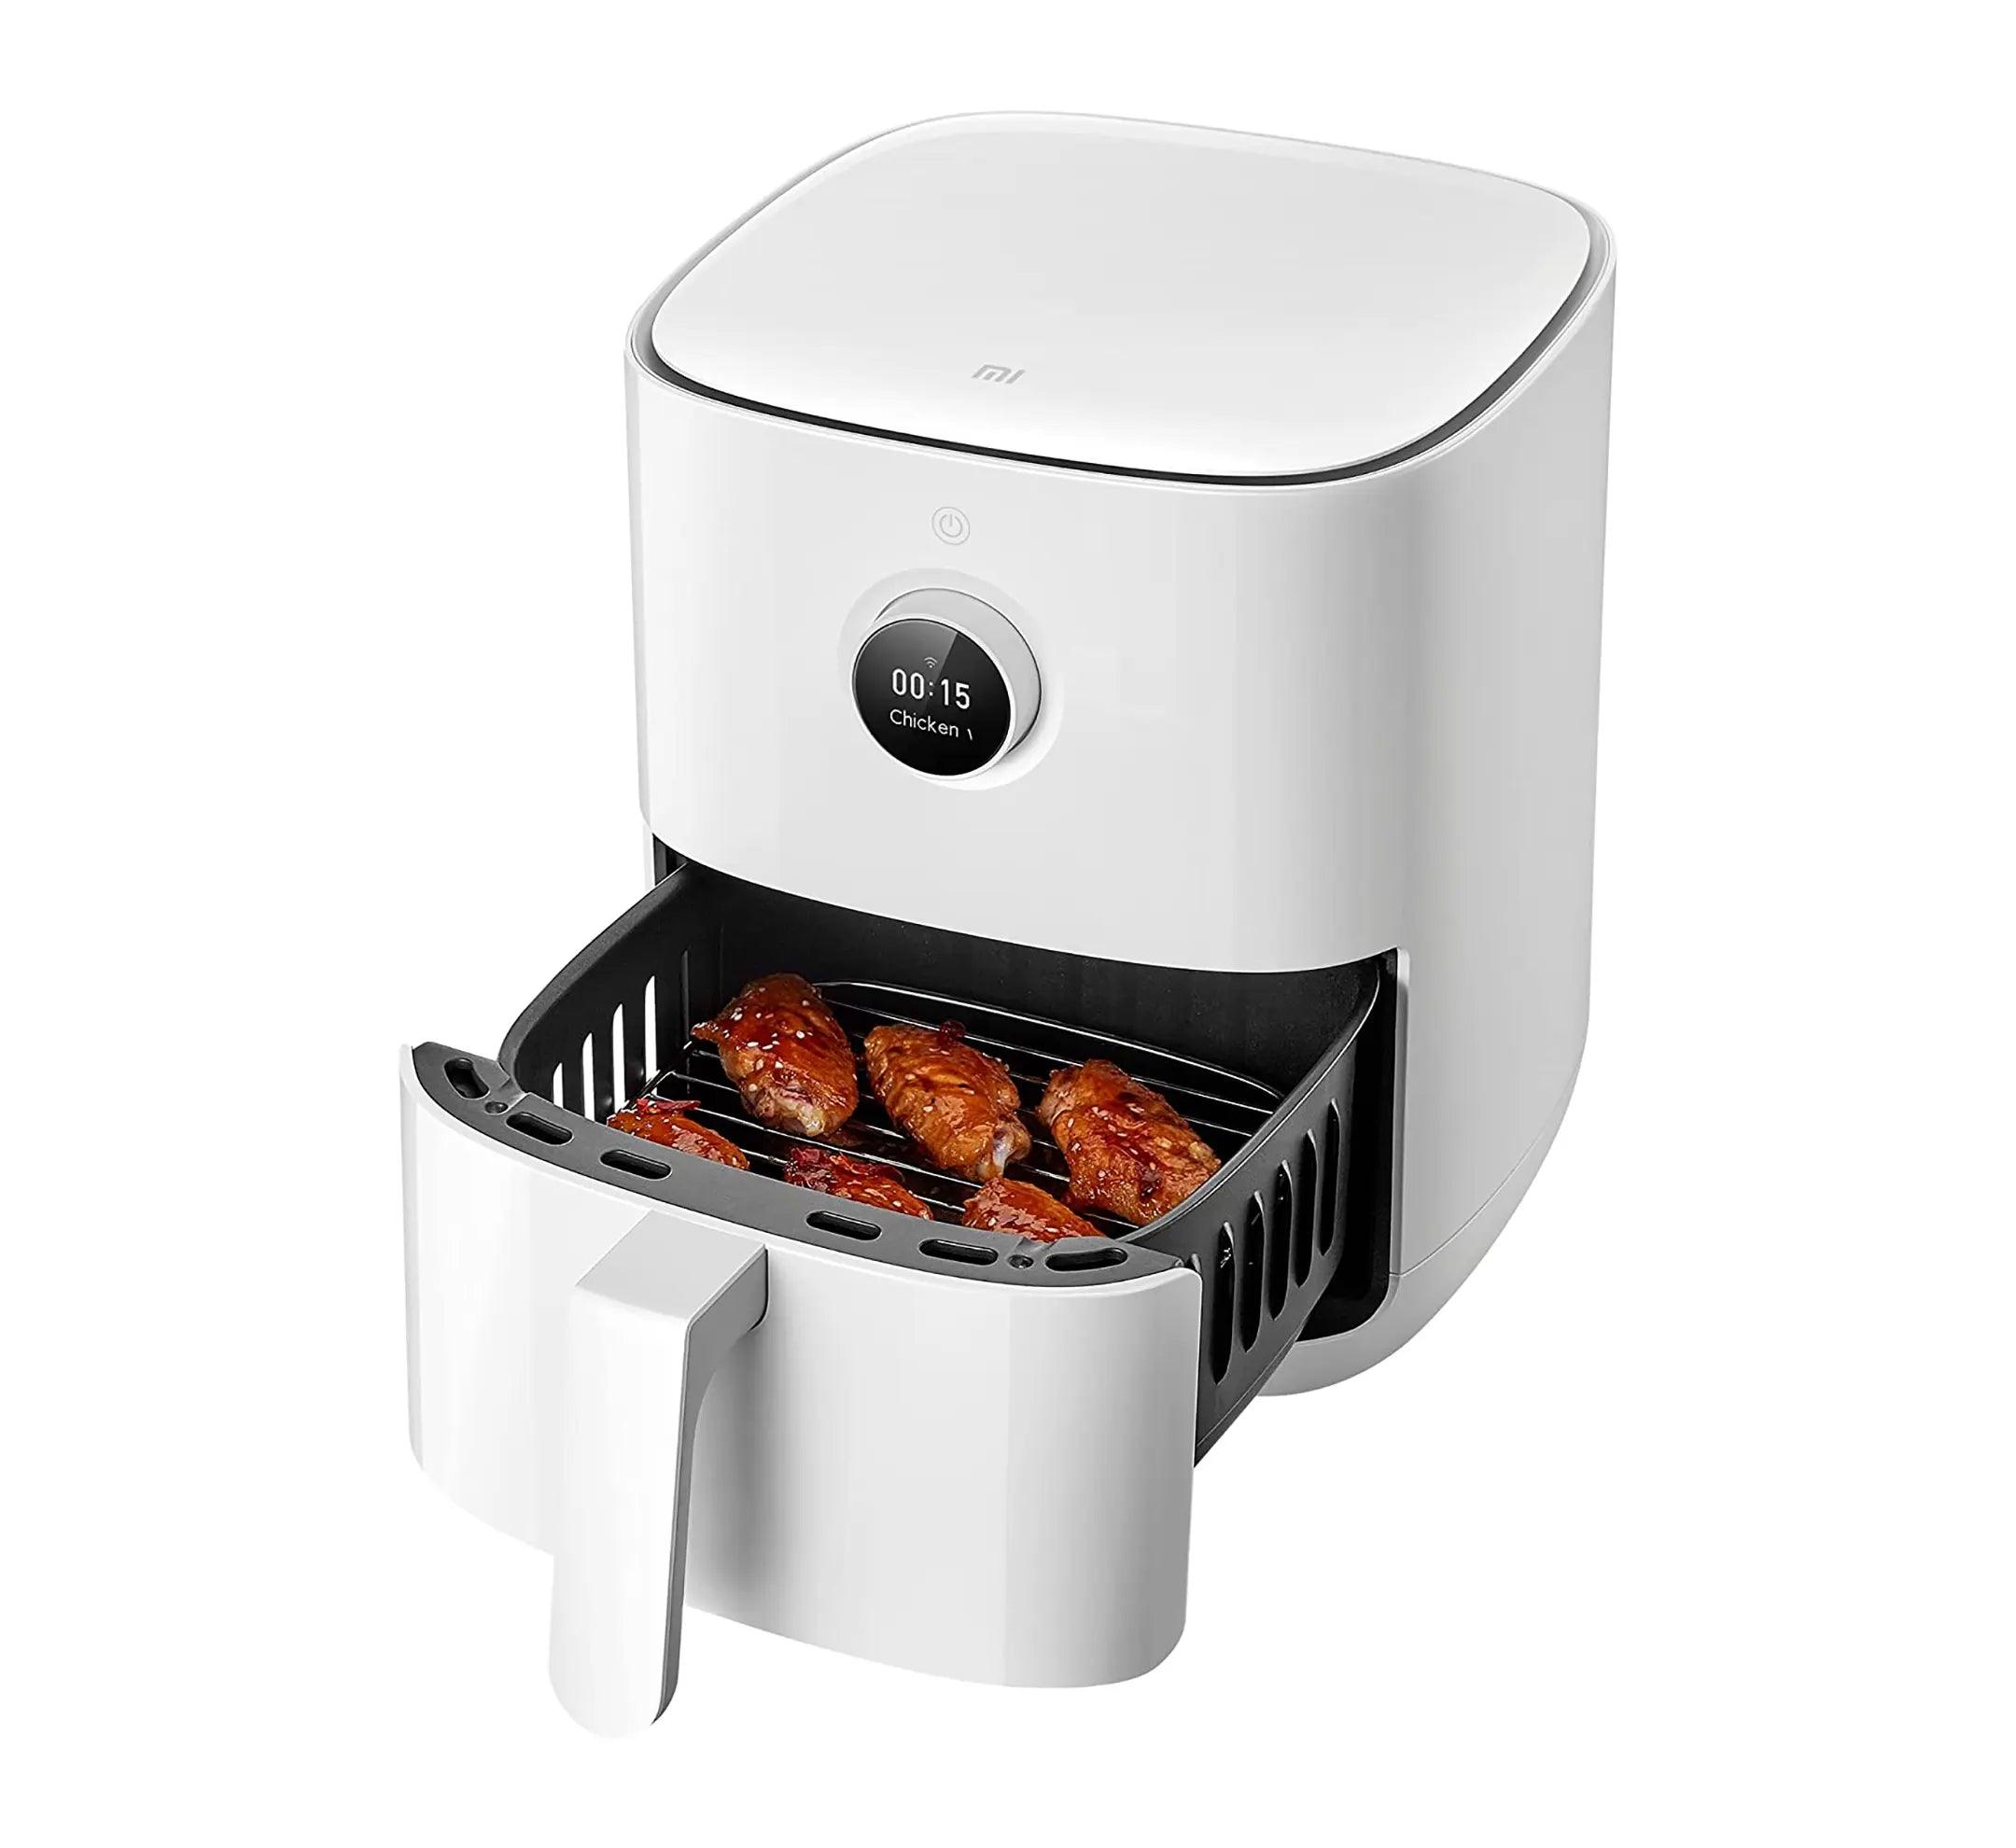 Xiaomi Mi Smart Air Fryer 3.5L Healthier Cooking With Less Oil and Low-fat - Brightex Retail UK